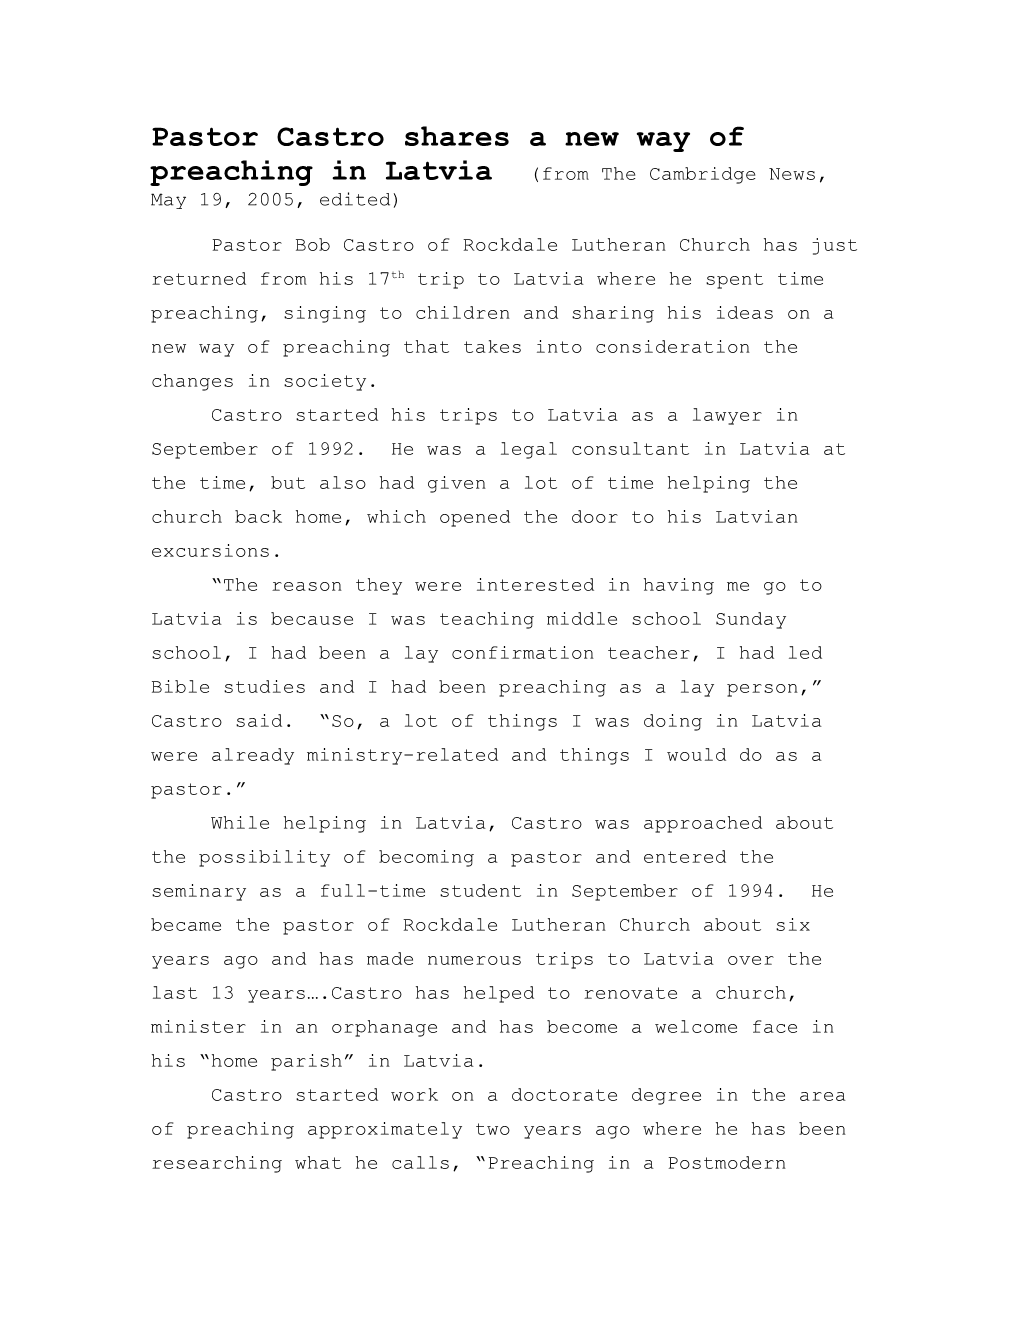 Pastor Castro Shares a New Way of Preaching in Latvia (From the Cambridge News, May 19, 2005)